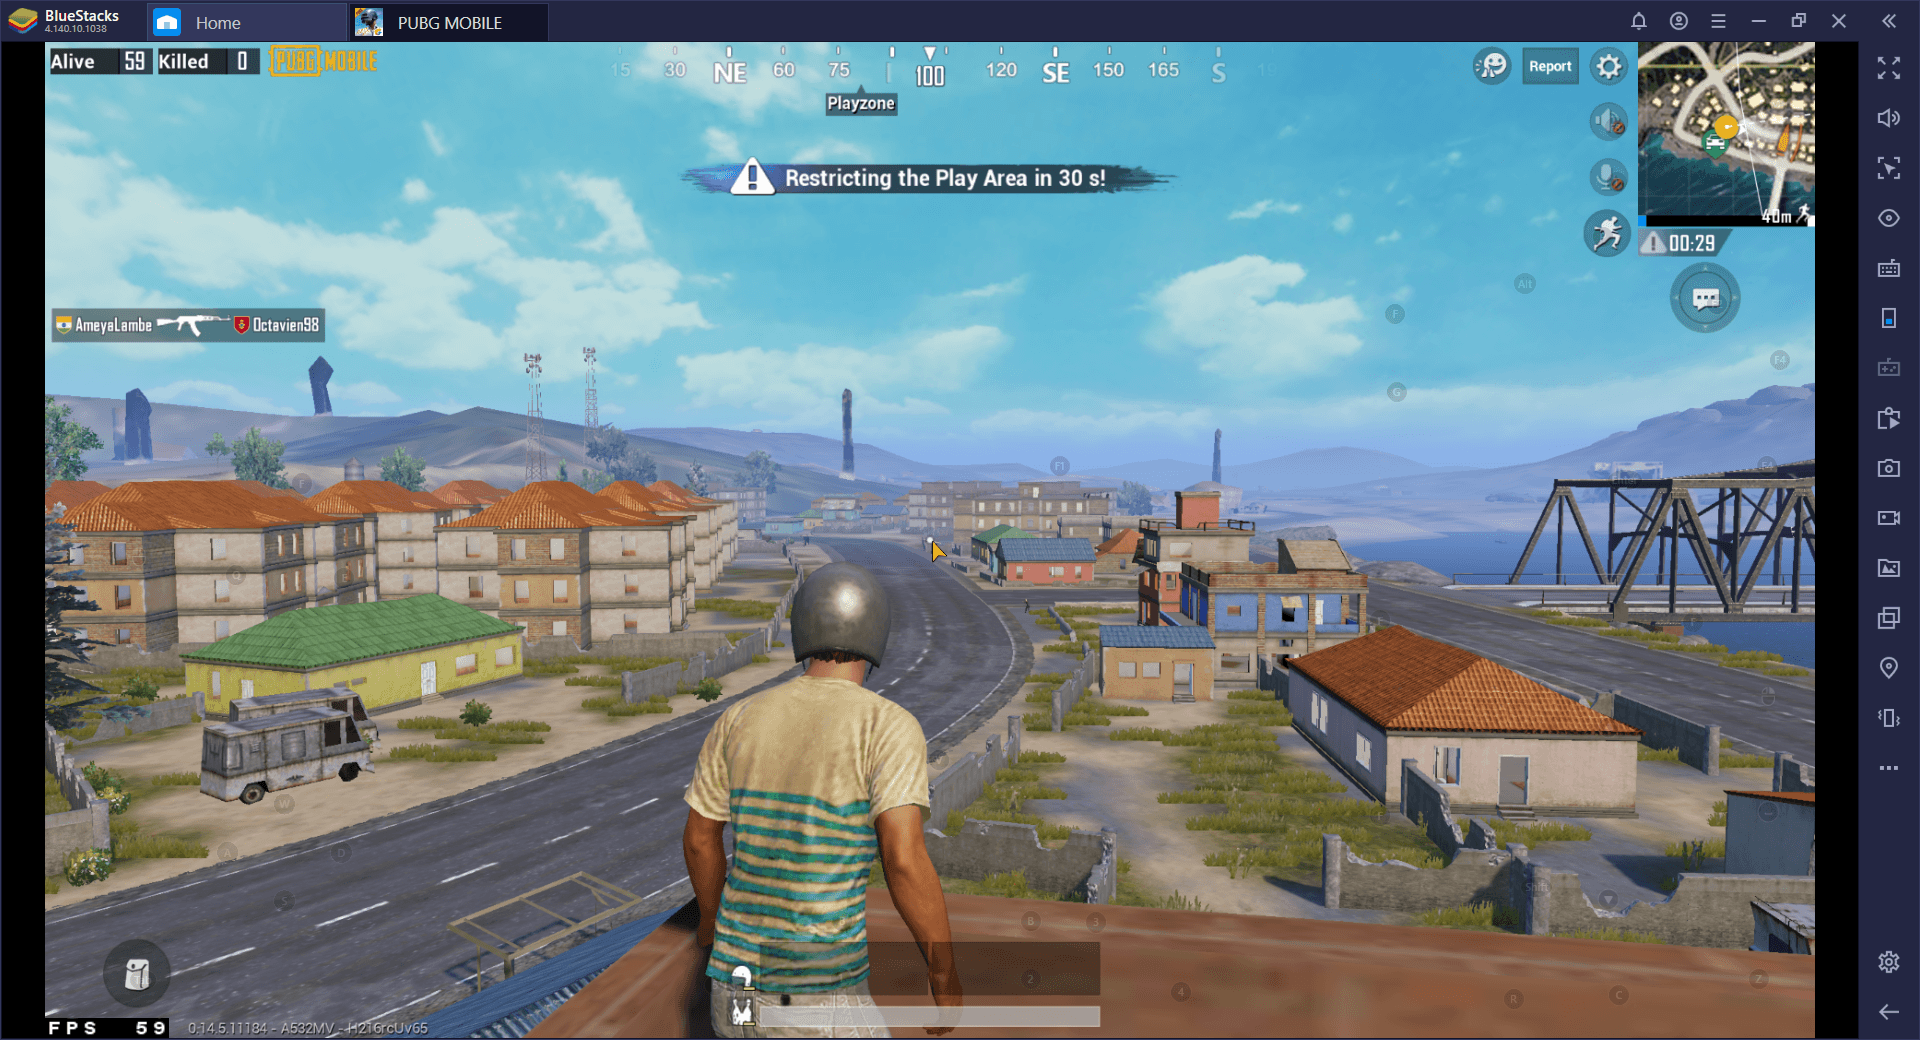 Bluestacks Update Play Pubg Mobile On Pc With Full Hd 1080p Qhd 1440p Display